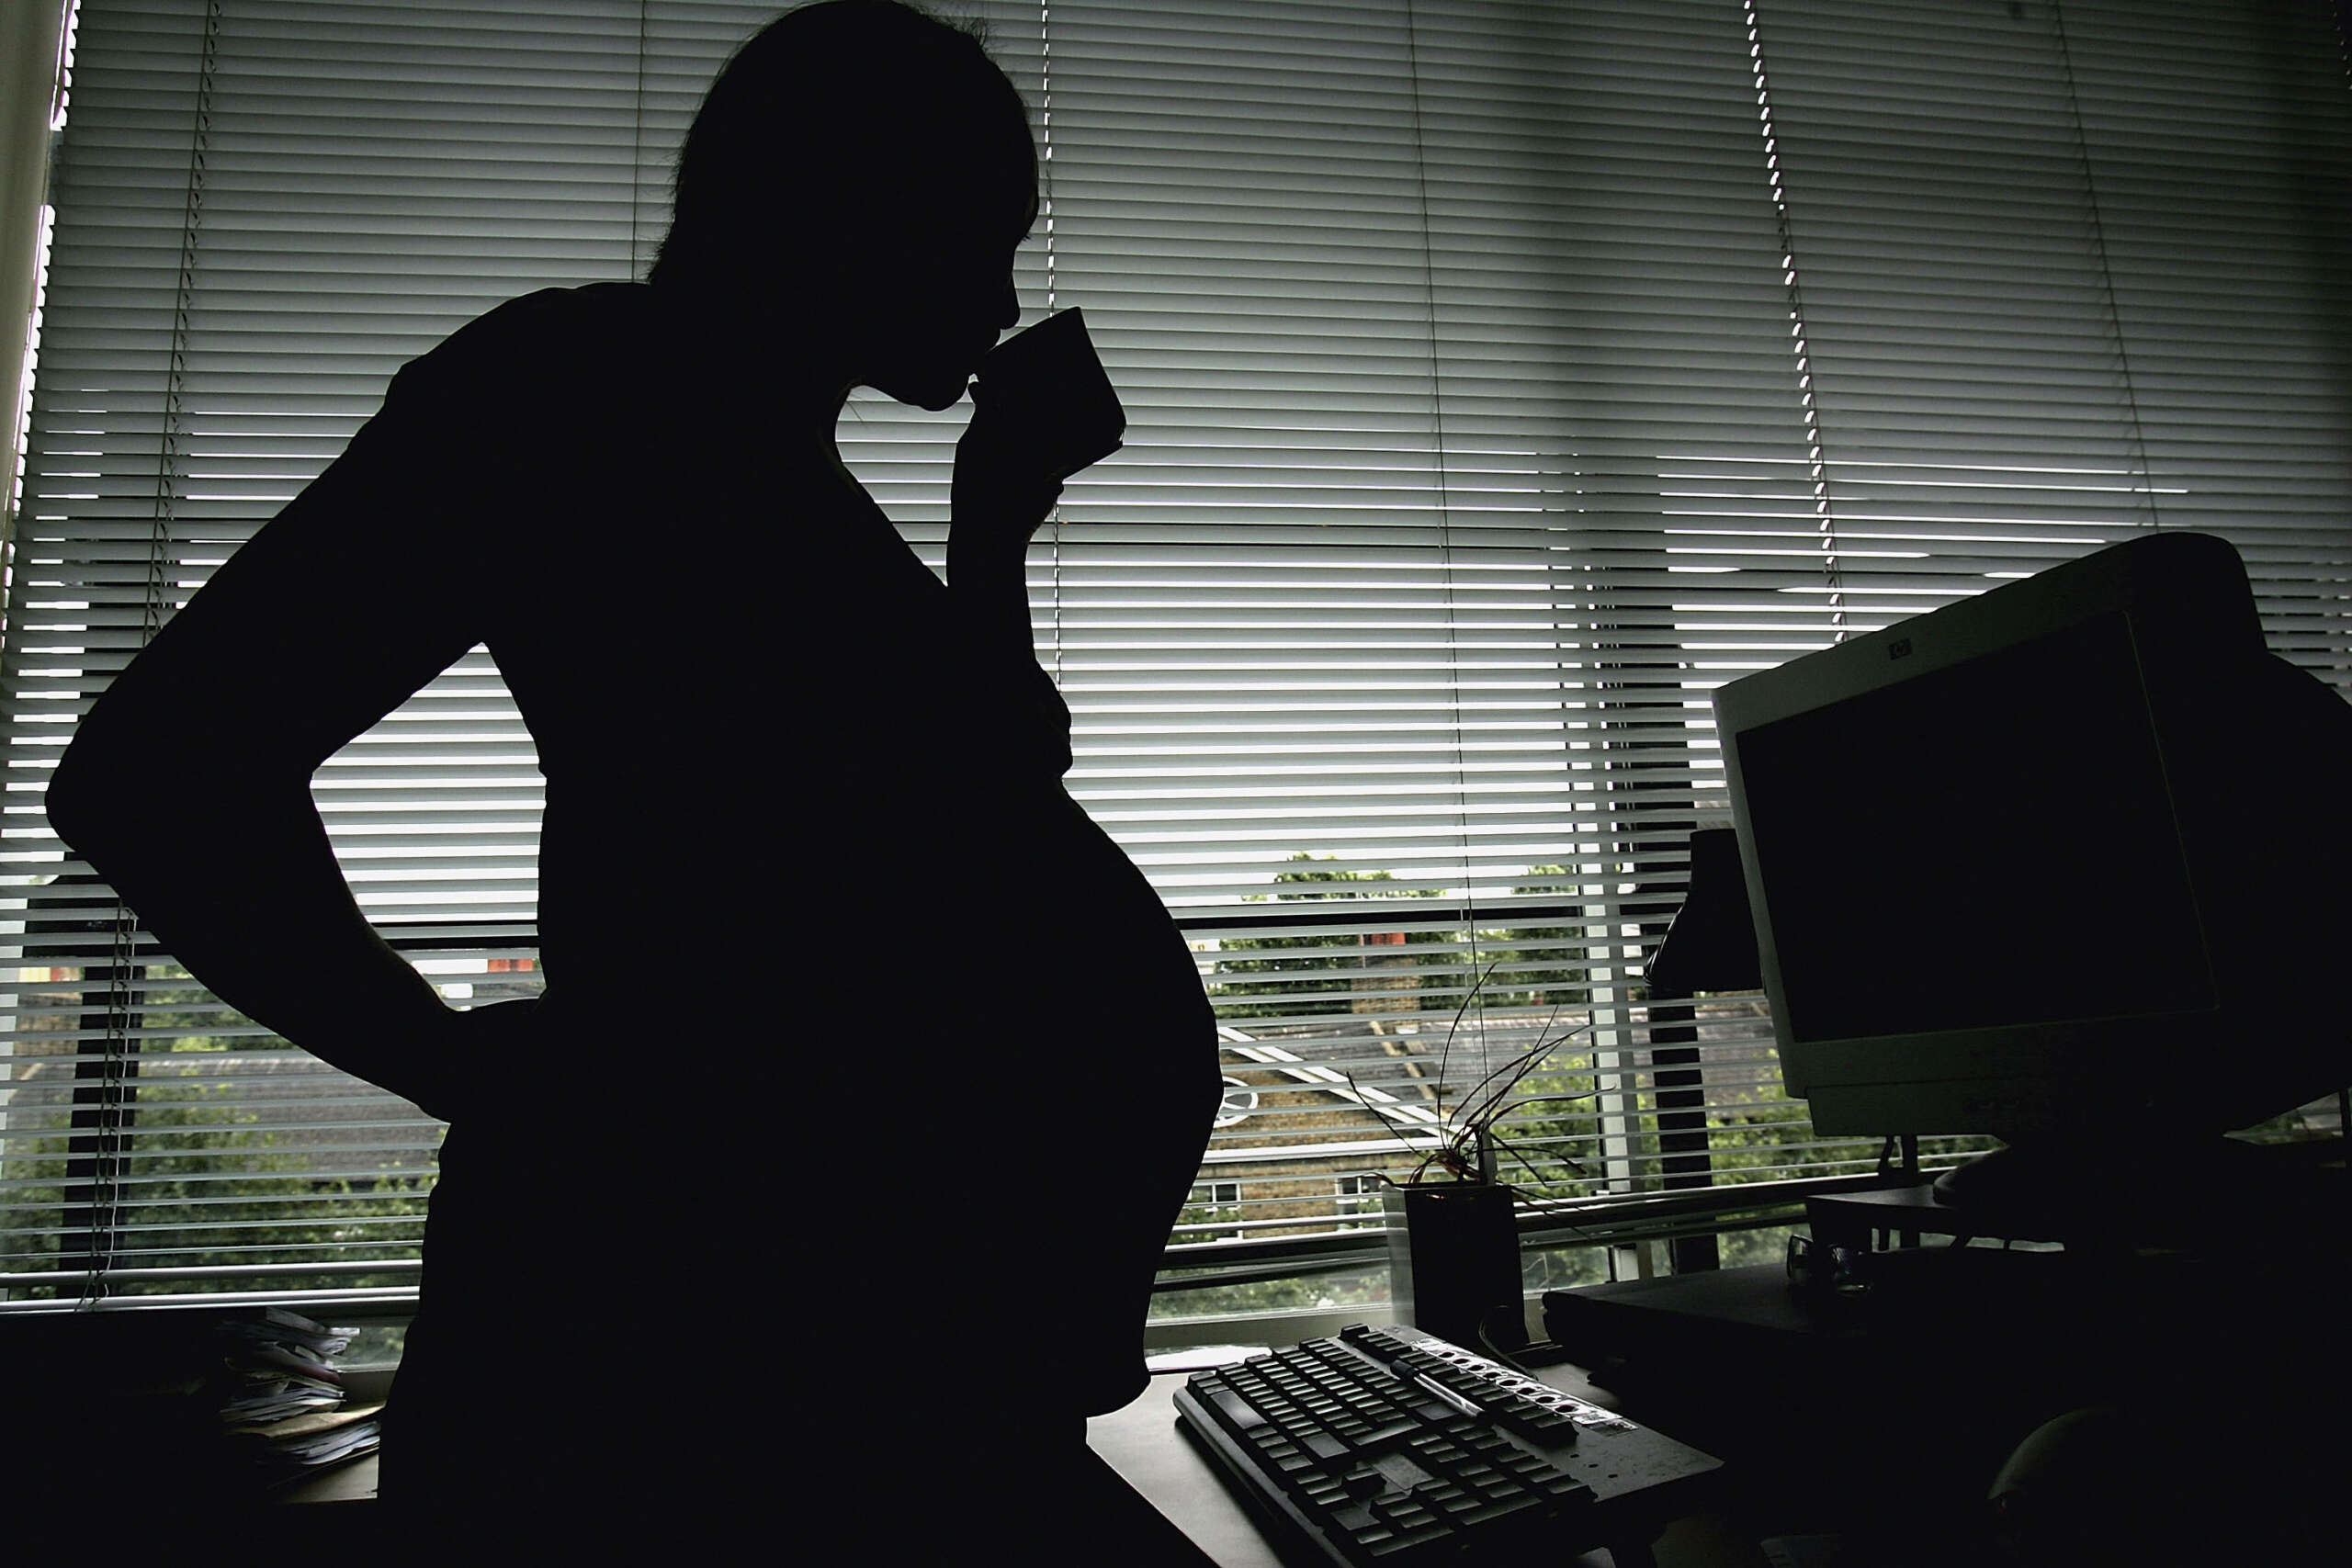 Pregnancy Criminalization in the U.S. Is an “Avoidable Human Rights Cr…